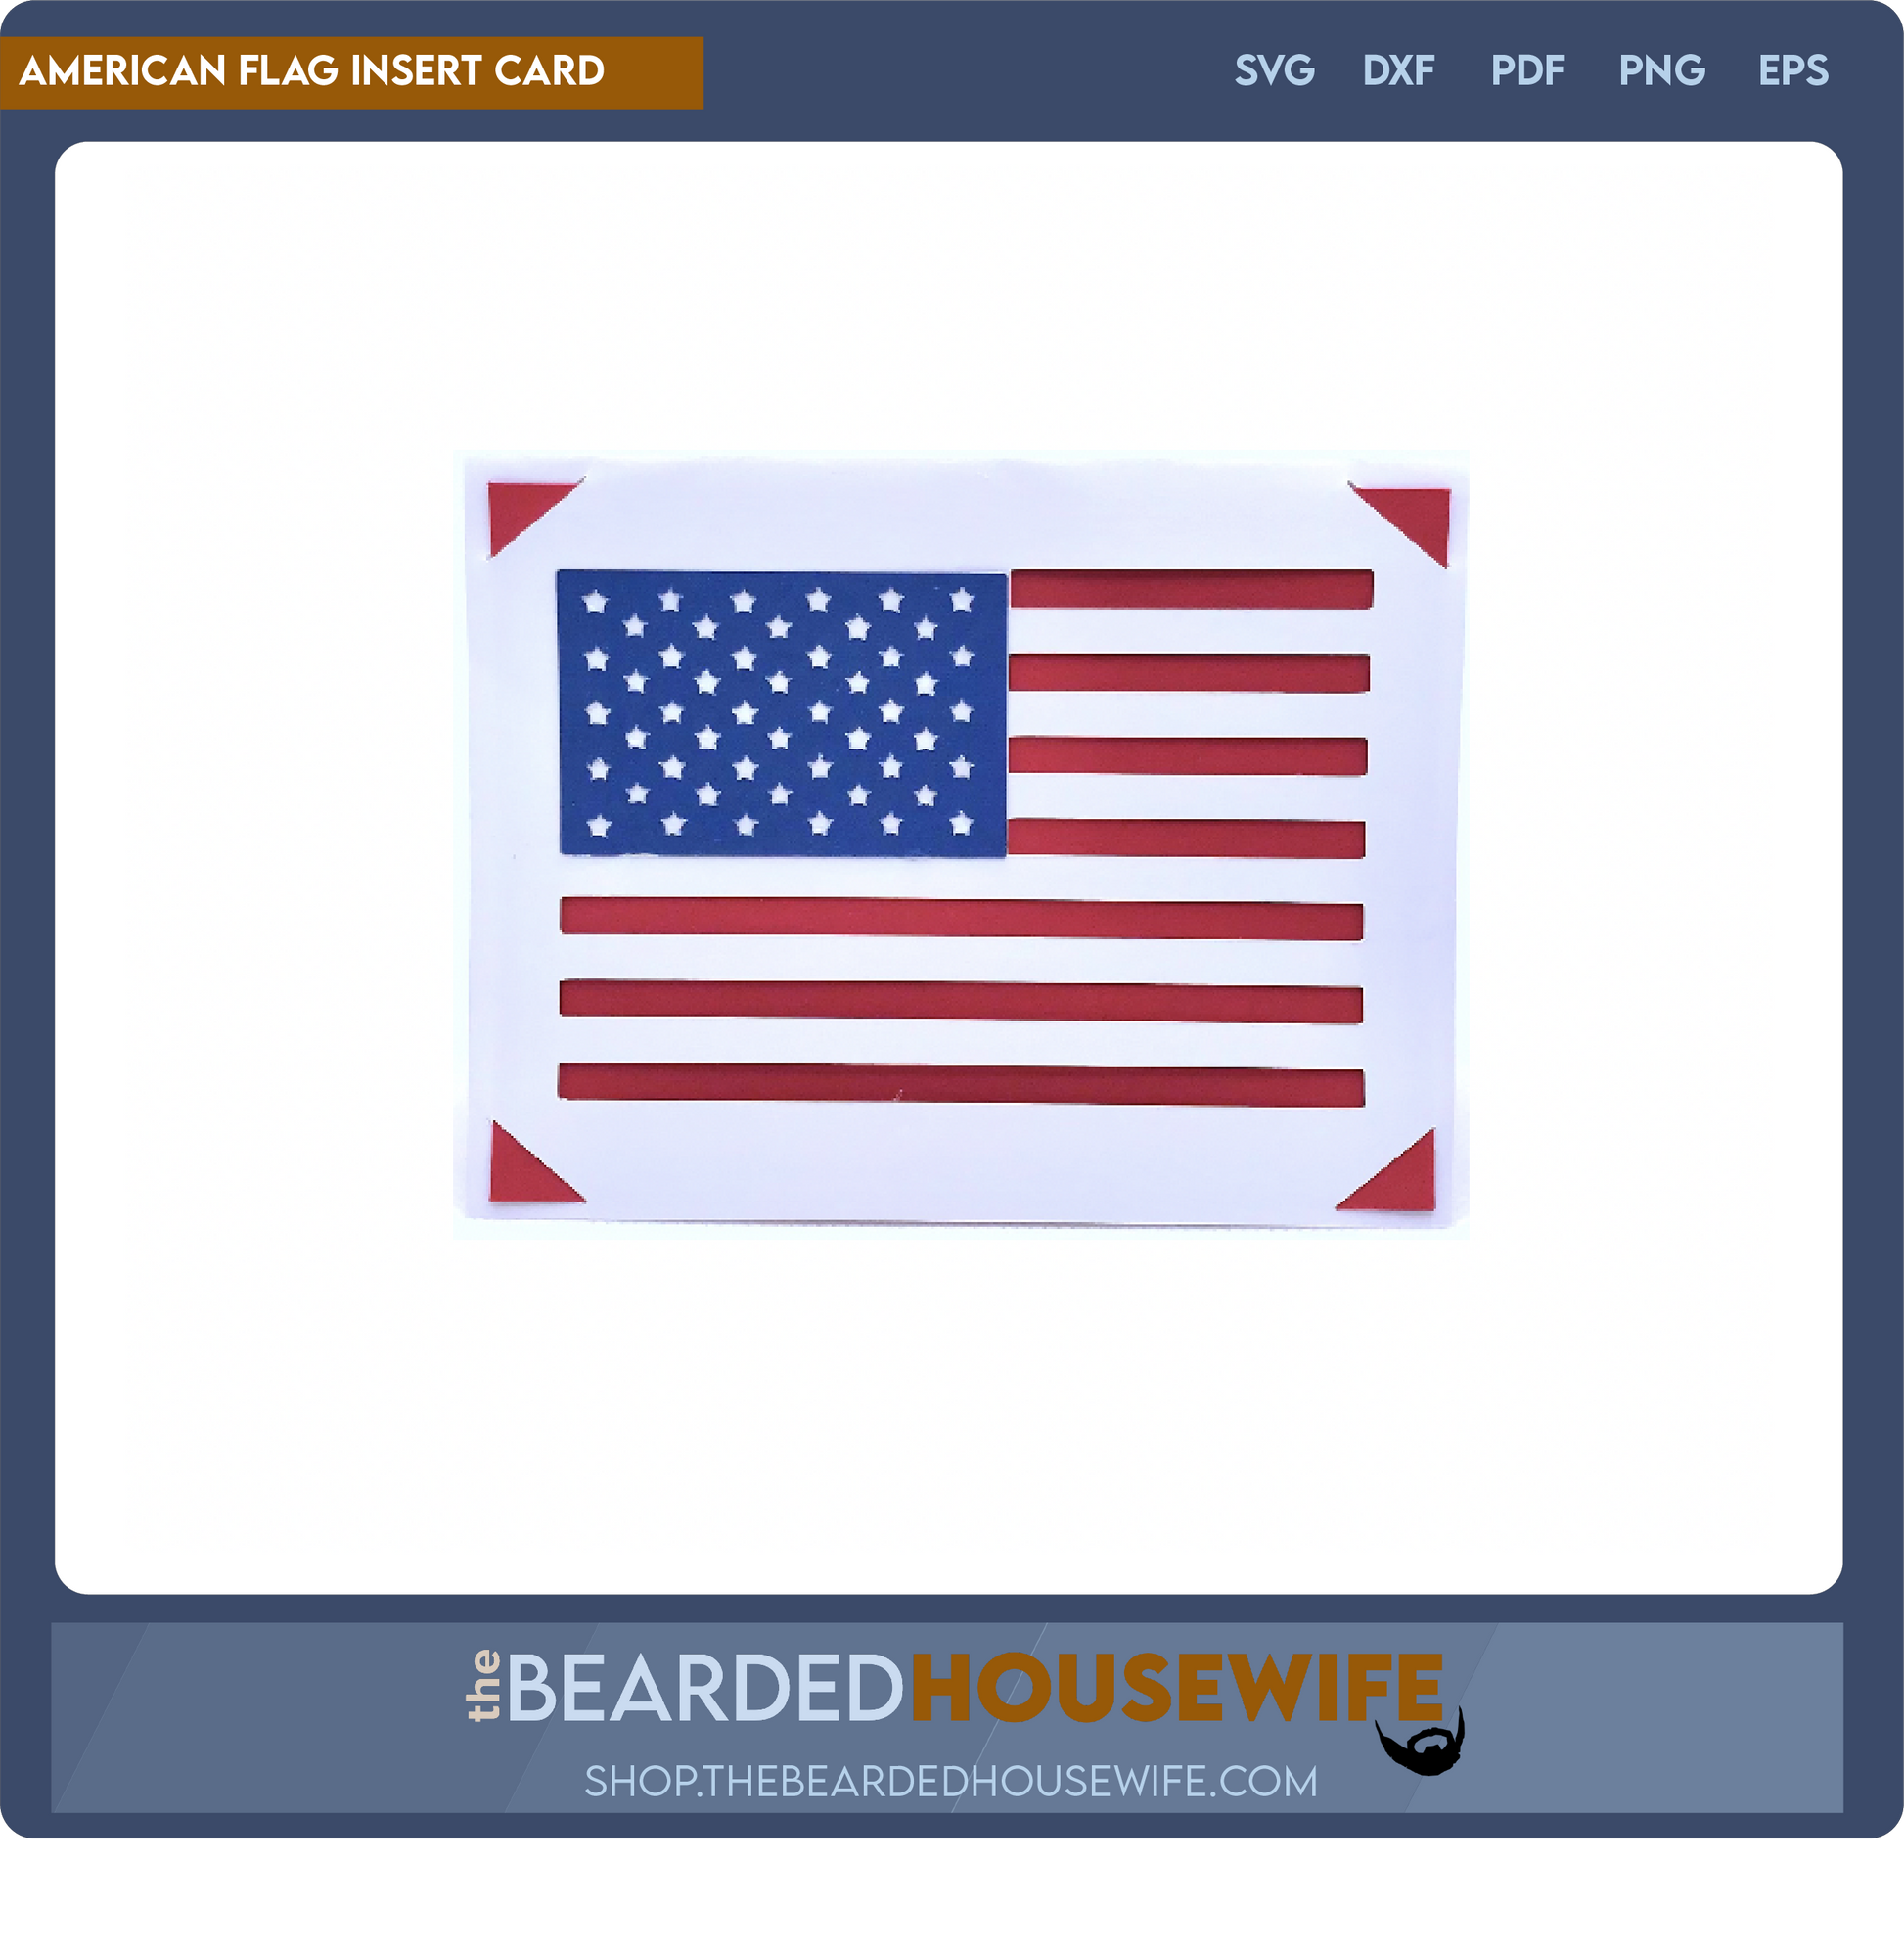 american flag insert card - the bearded housewife